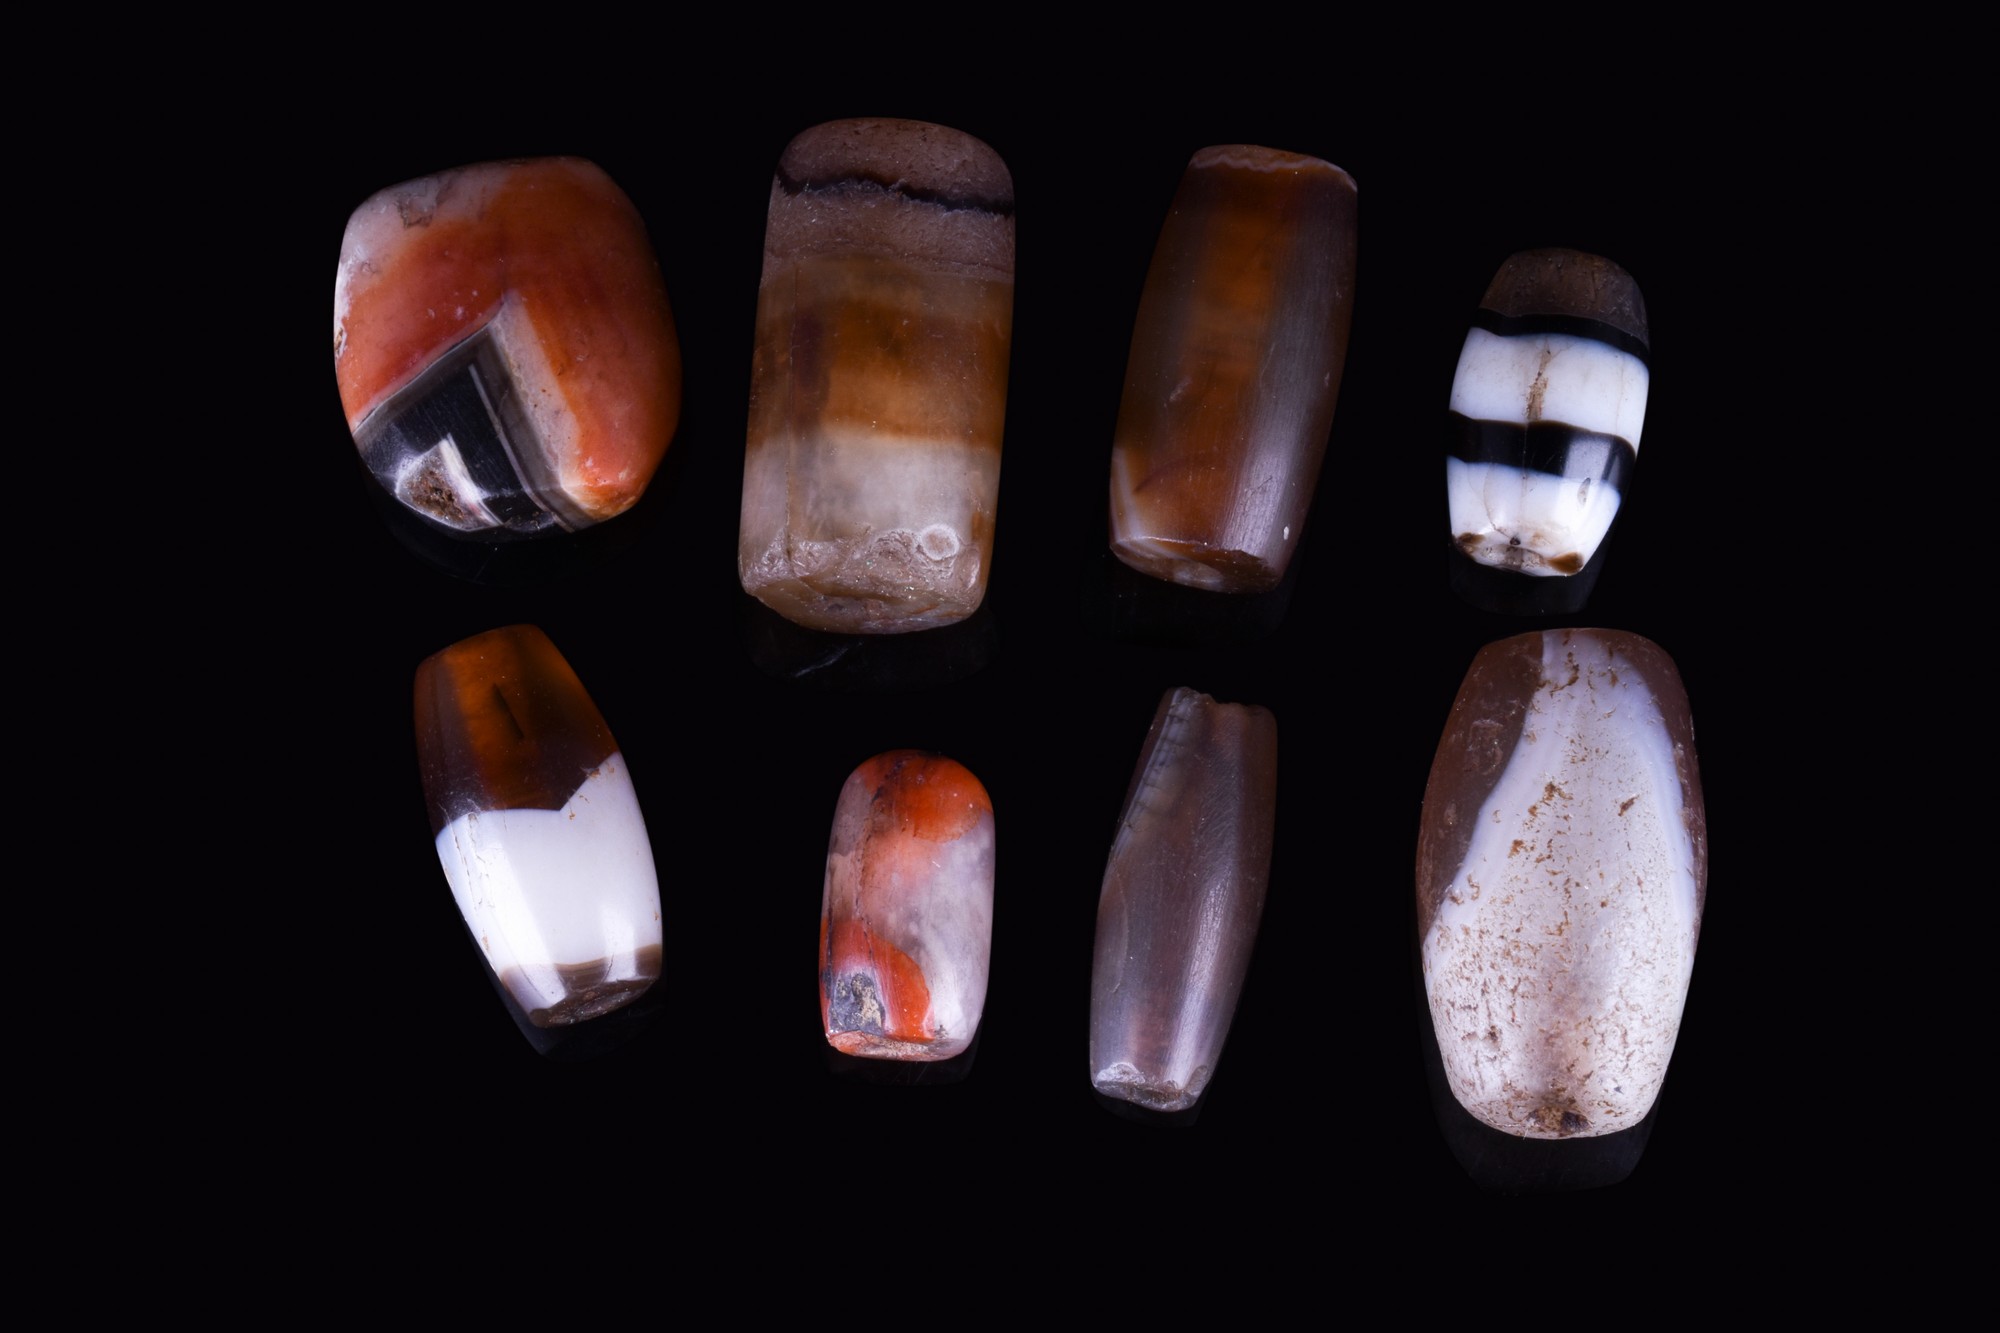 COLLECTION OF BACTRIAN AGATE STONE BEADS